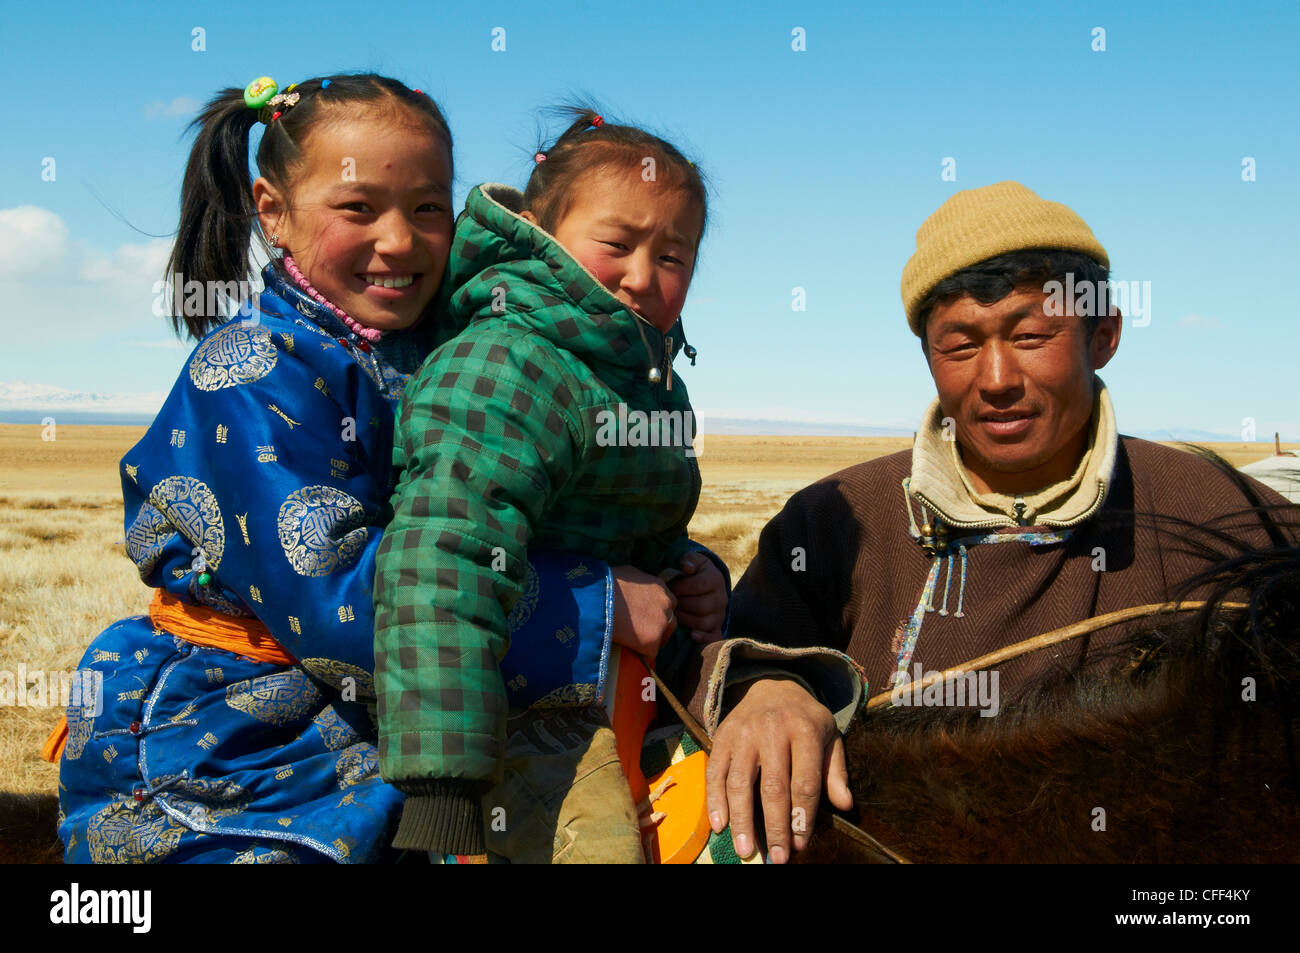 nomadic-mongolian-people-in-winter-province-of-khovd-mongolia-central-CFF4KY.jpg